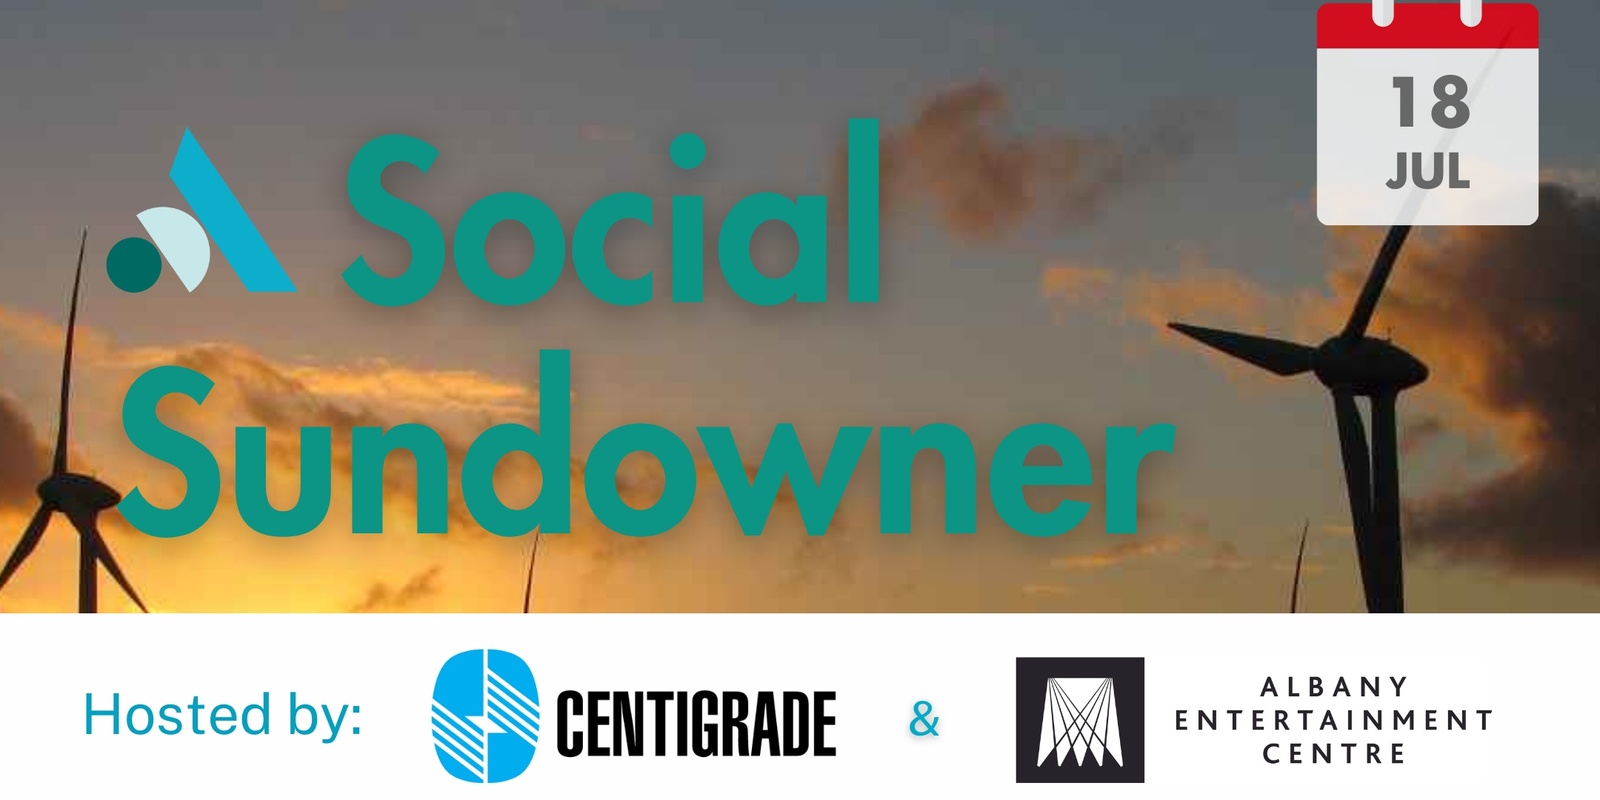 Banner image for ACCI Social Sundowners with Centigrade + AEC